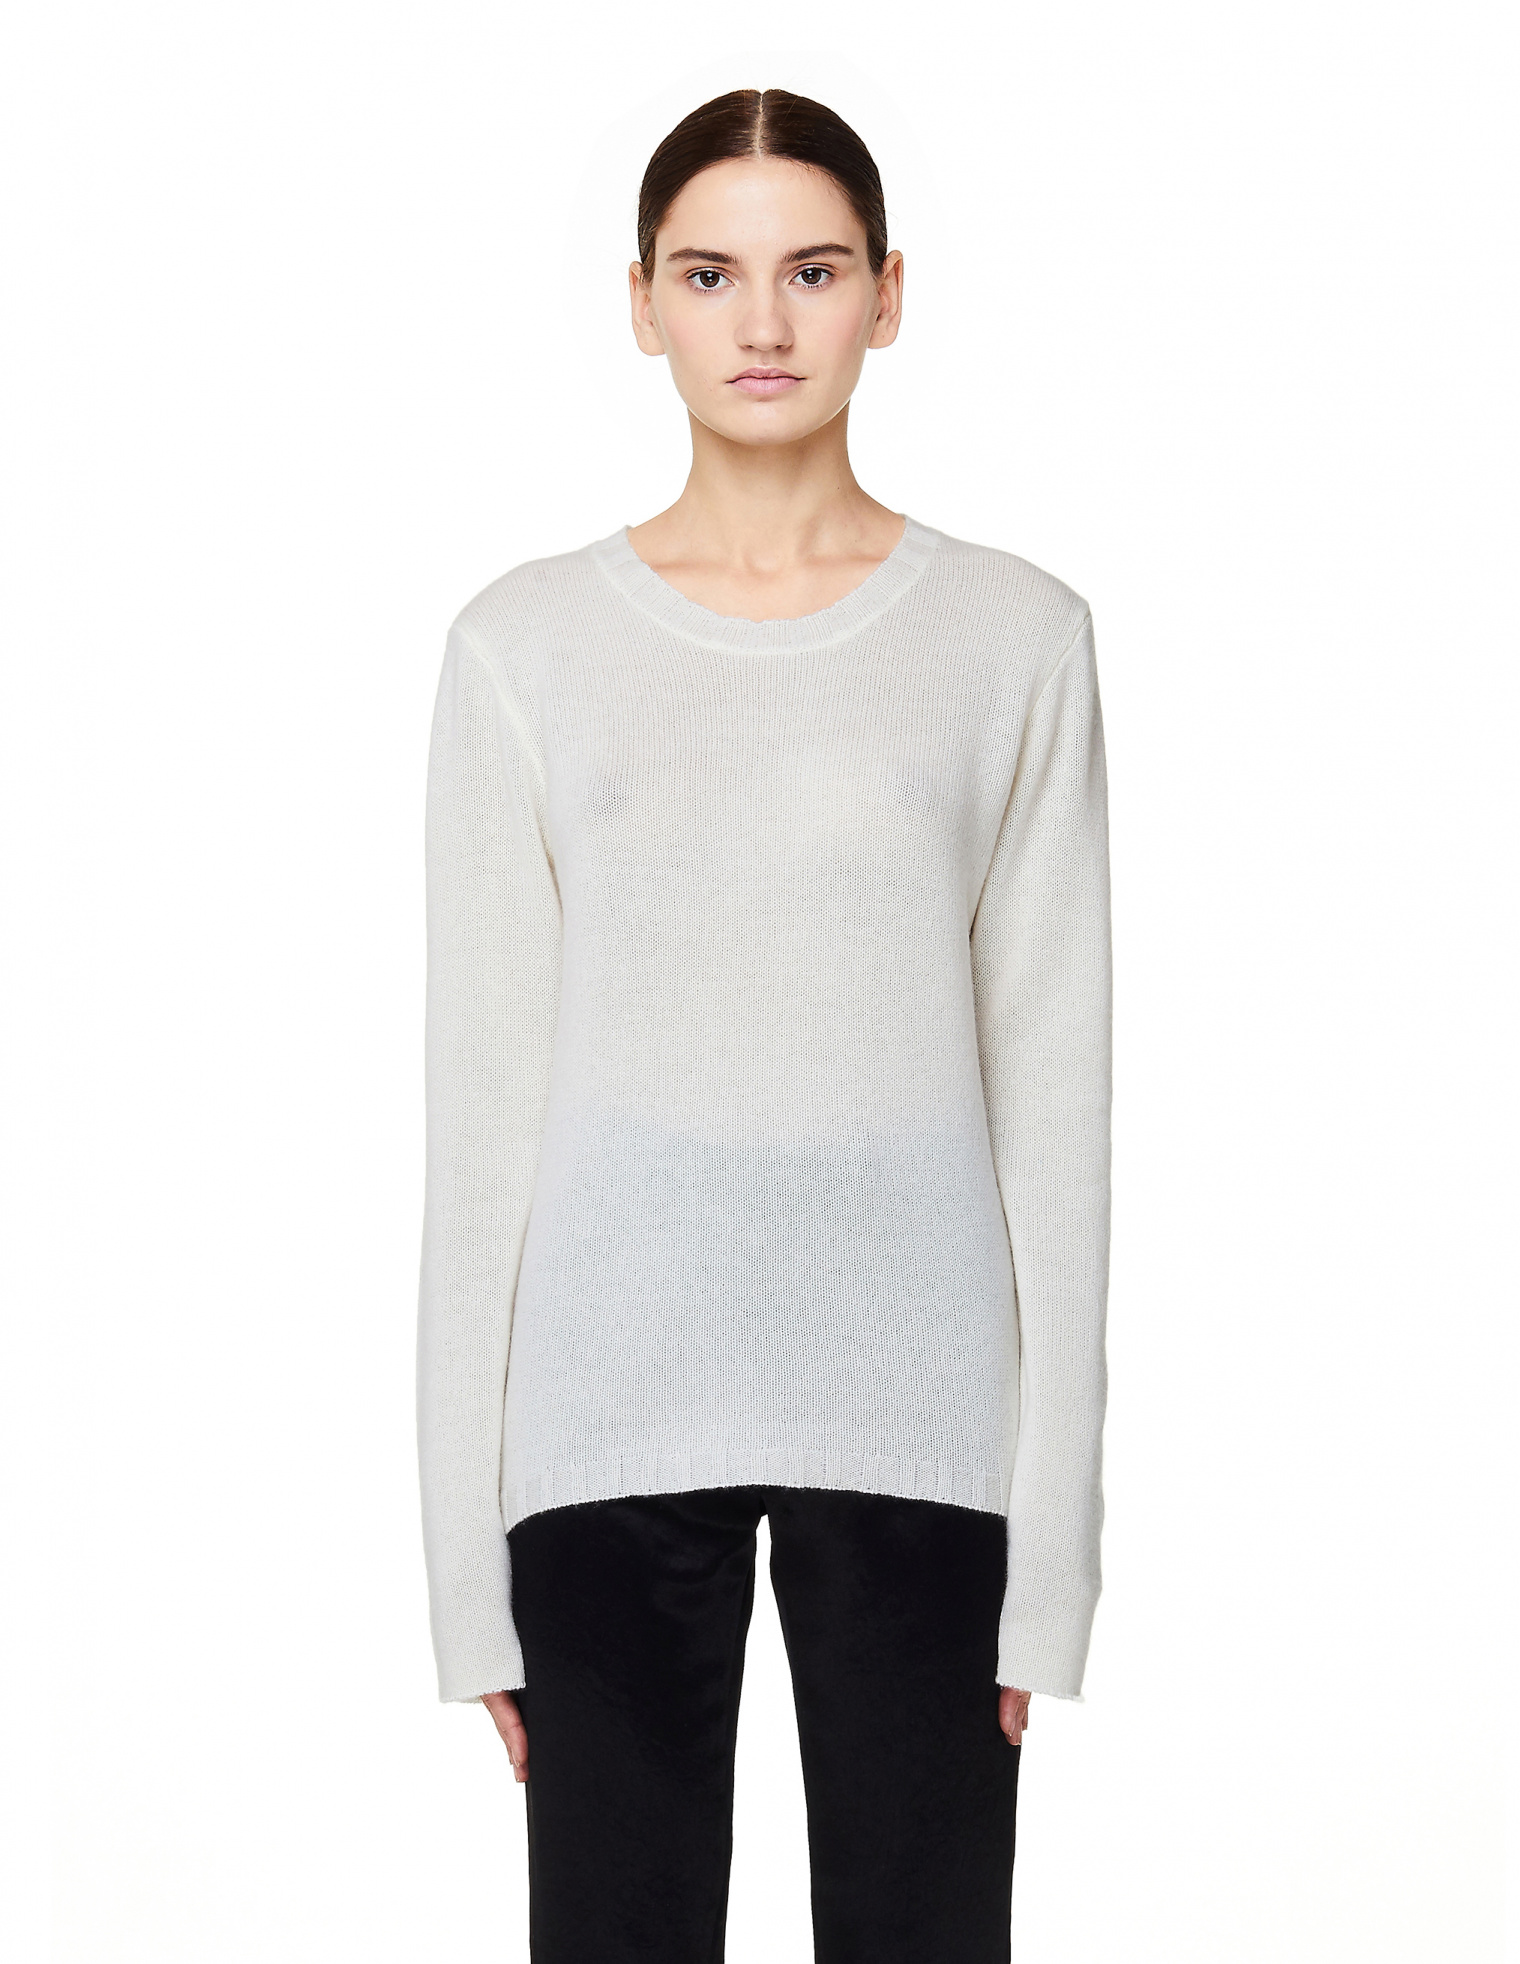 James Perse Ivory Cashmere Sweater